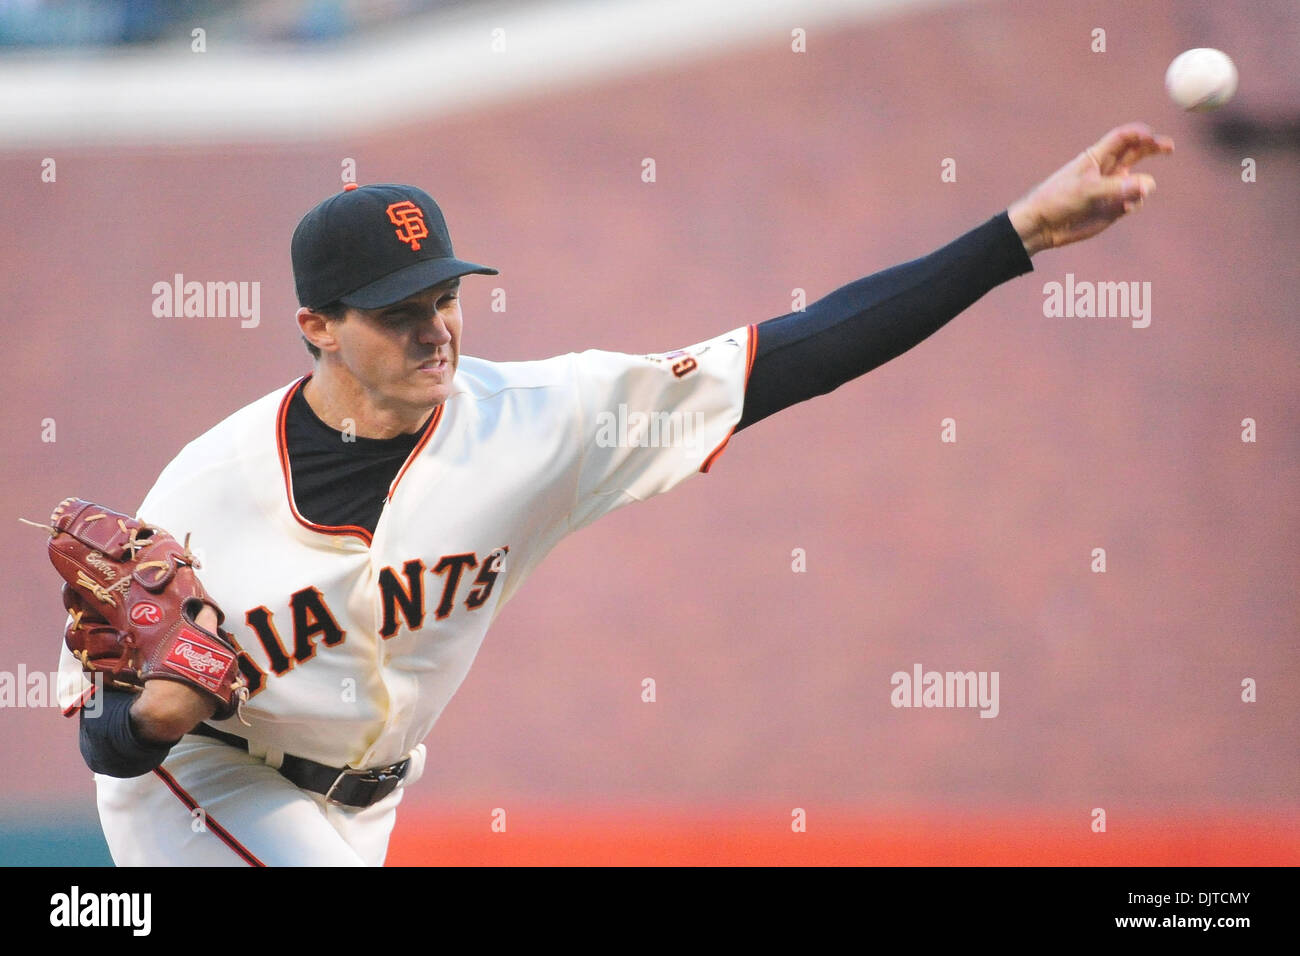 San Francisco, CA: San Francisco Giants' Barry Zito (75) pitches the ball. The Padres won the game 3-2. (Credit Image: © Charles Herskowitz/Southcreek Global/ZUMApress.com) Stock Photo